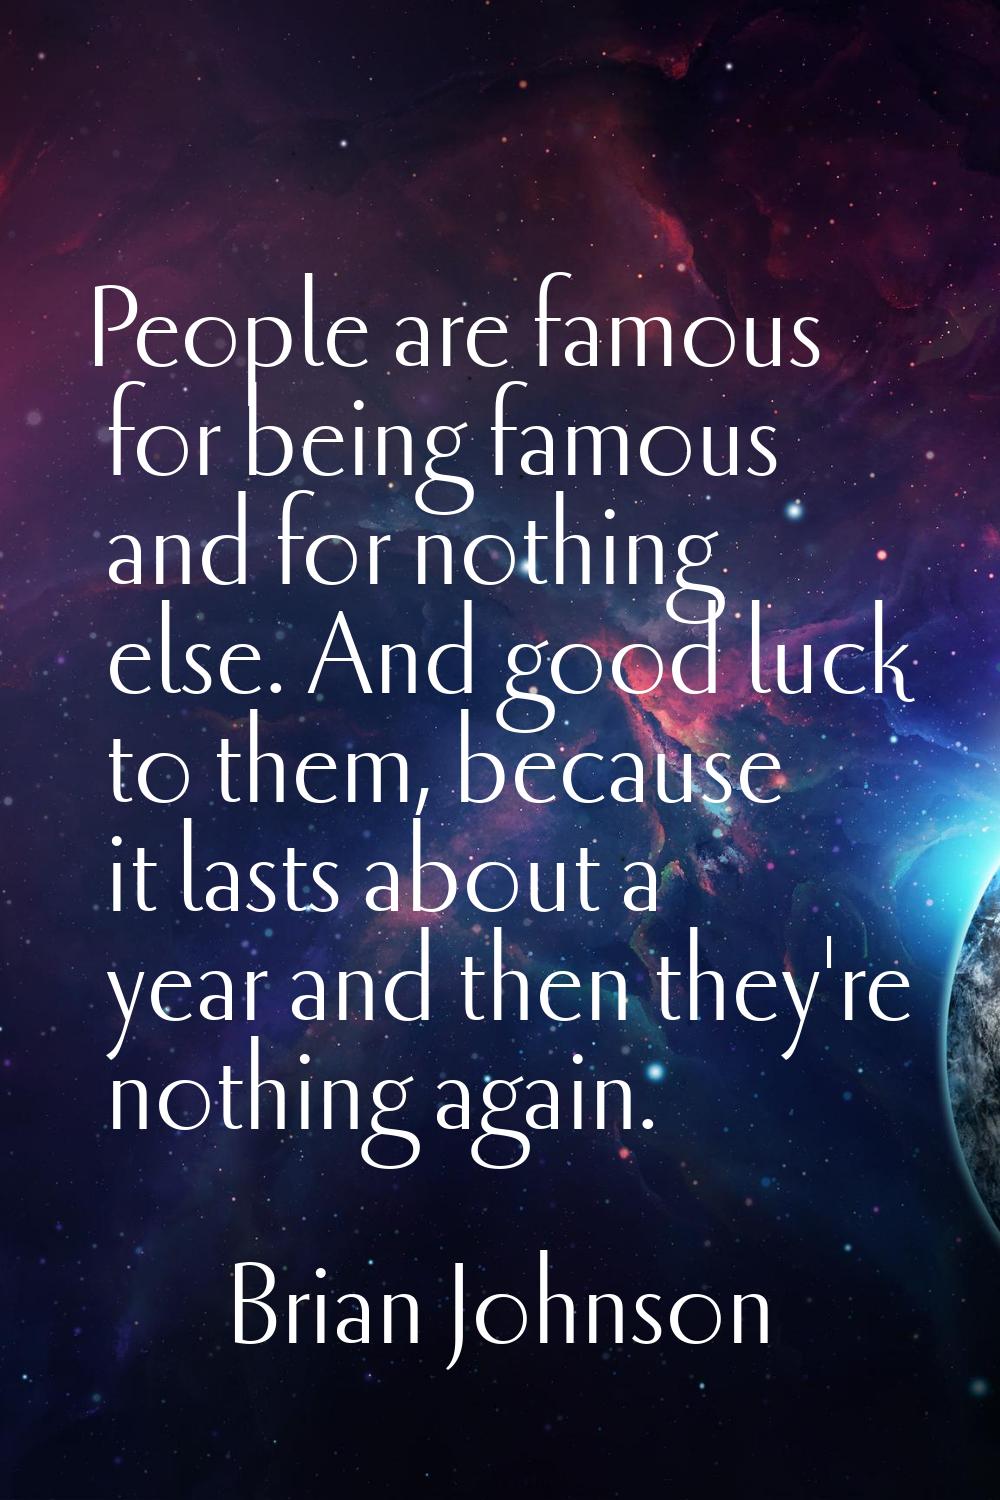 People are famous for being famous and for nothing else. And good luck to them, because it lasts ab